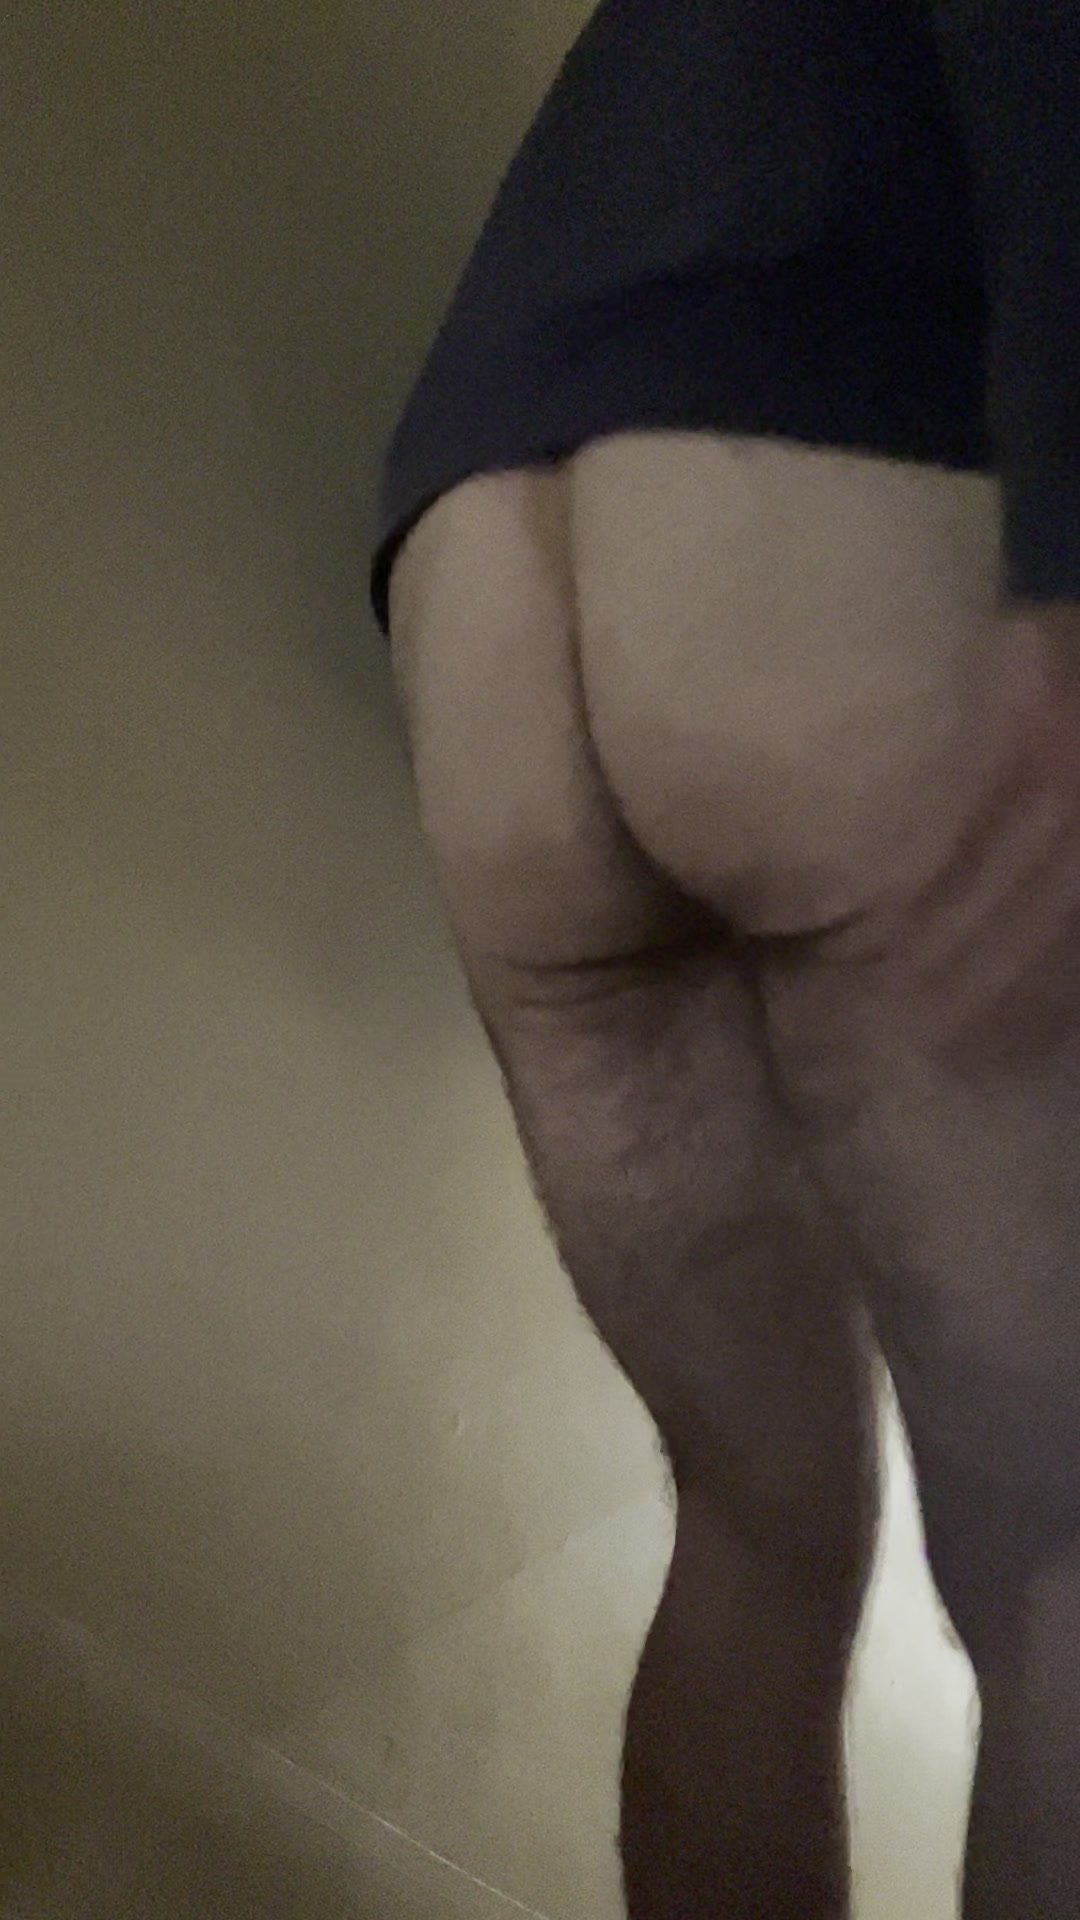 Straight guy spreads cheeks as a forfeit for lost bet